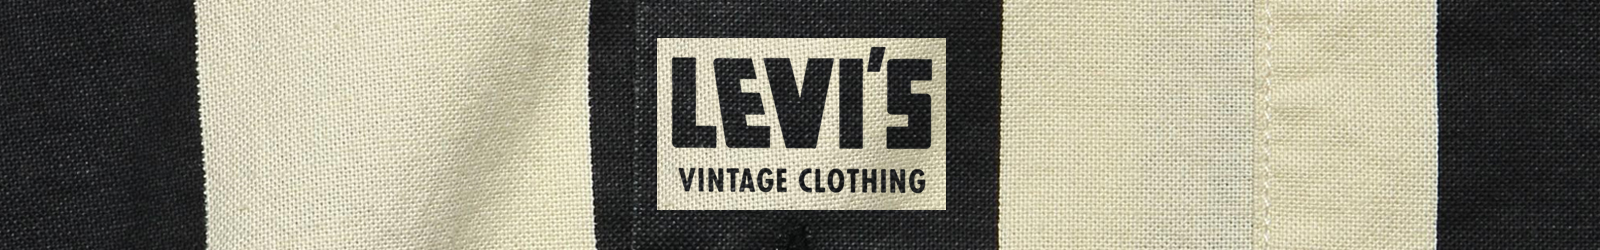 Levis Vintage Clothing | STAG